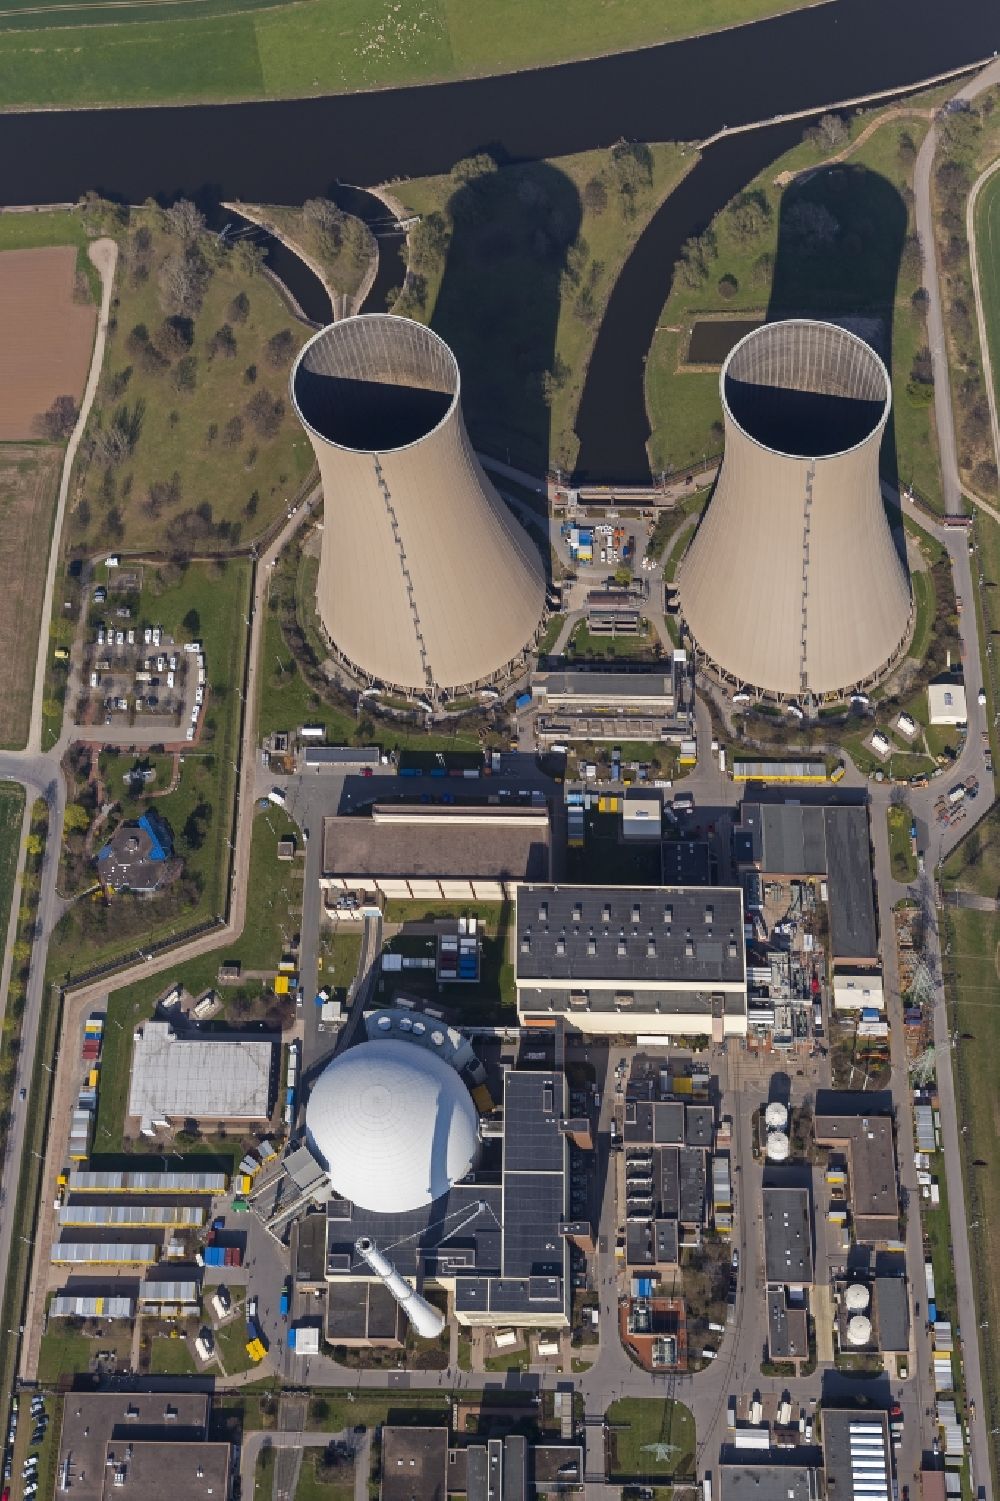 Aerial image Grohnde - View onto the cooling tower of the Nuclear Power Plant in Grohnde in the state Lower Saxony. It is located north of Grohnde at the river Weser